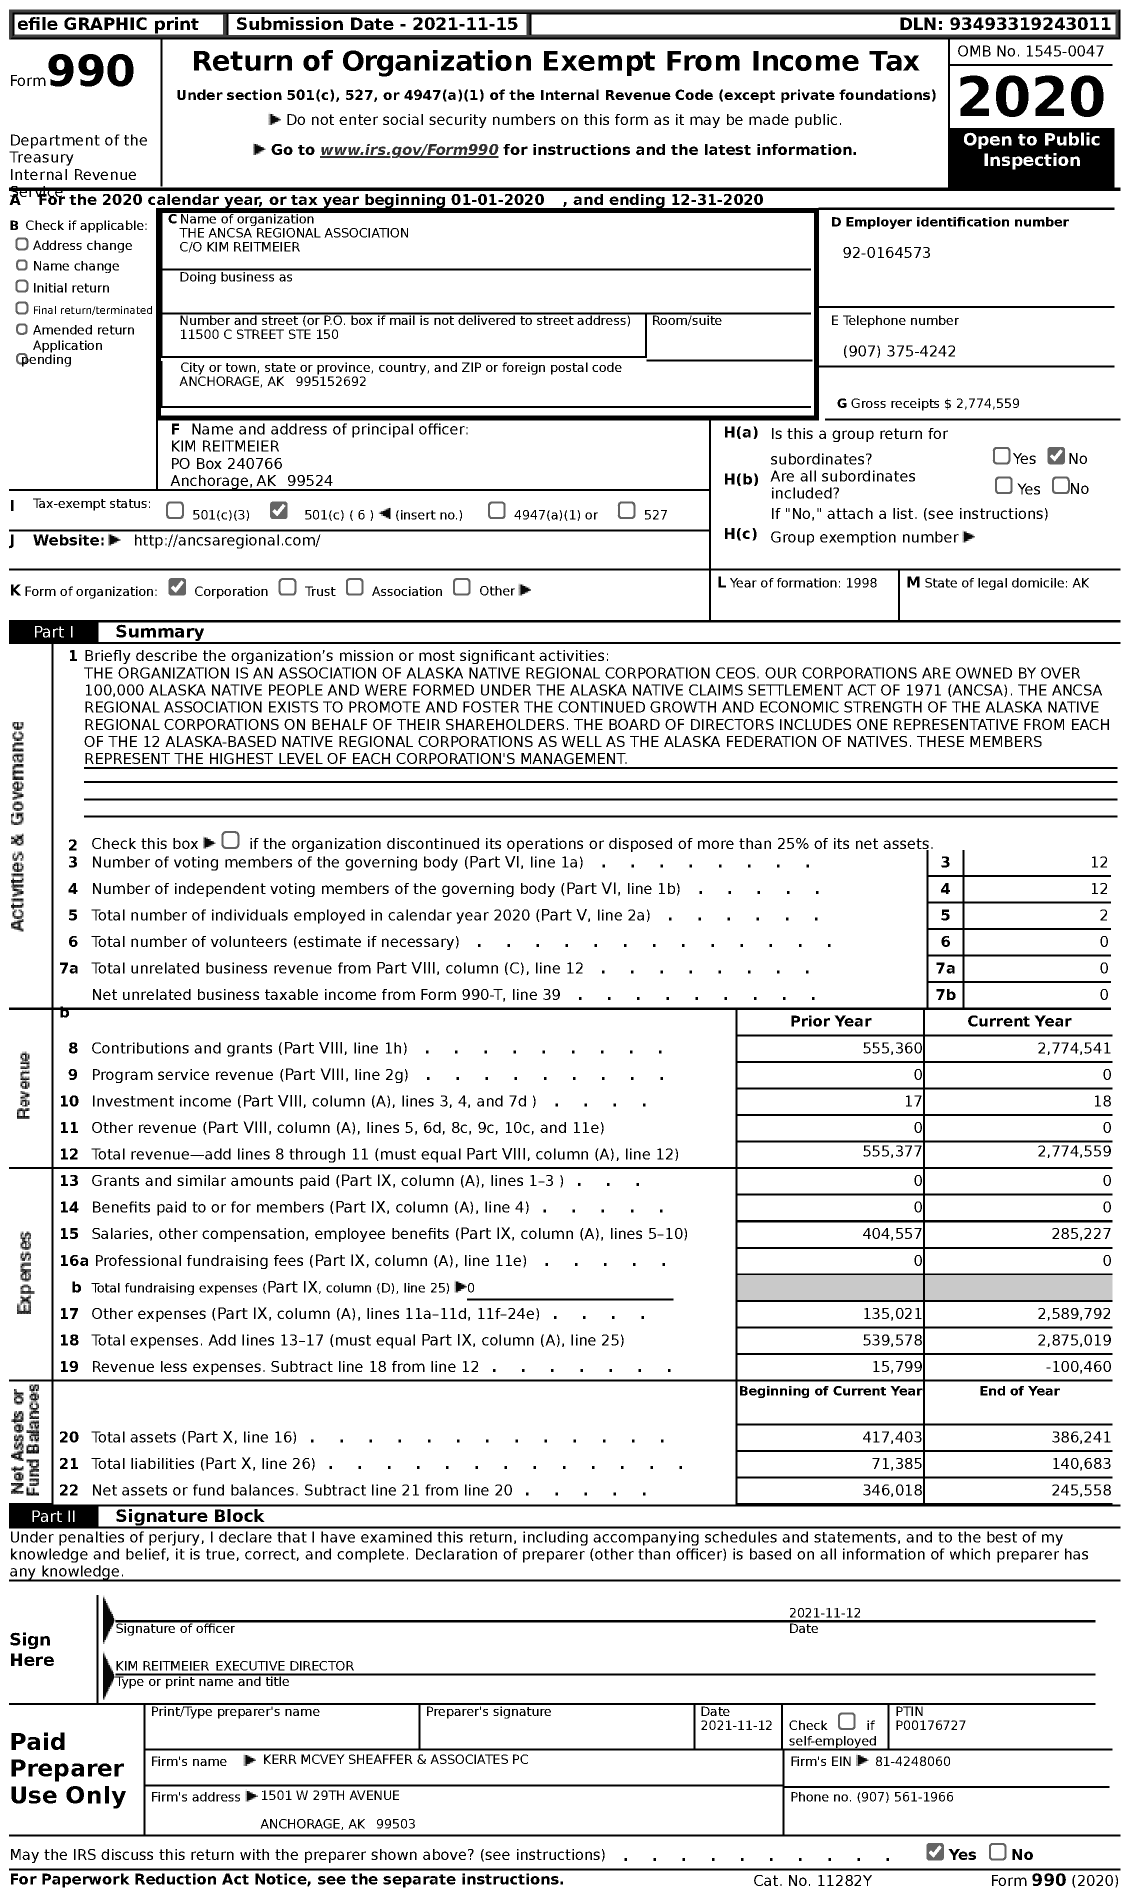 Image of first page of 2020 Form 990 for The Ancsa Regional Association